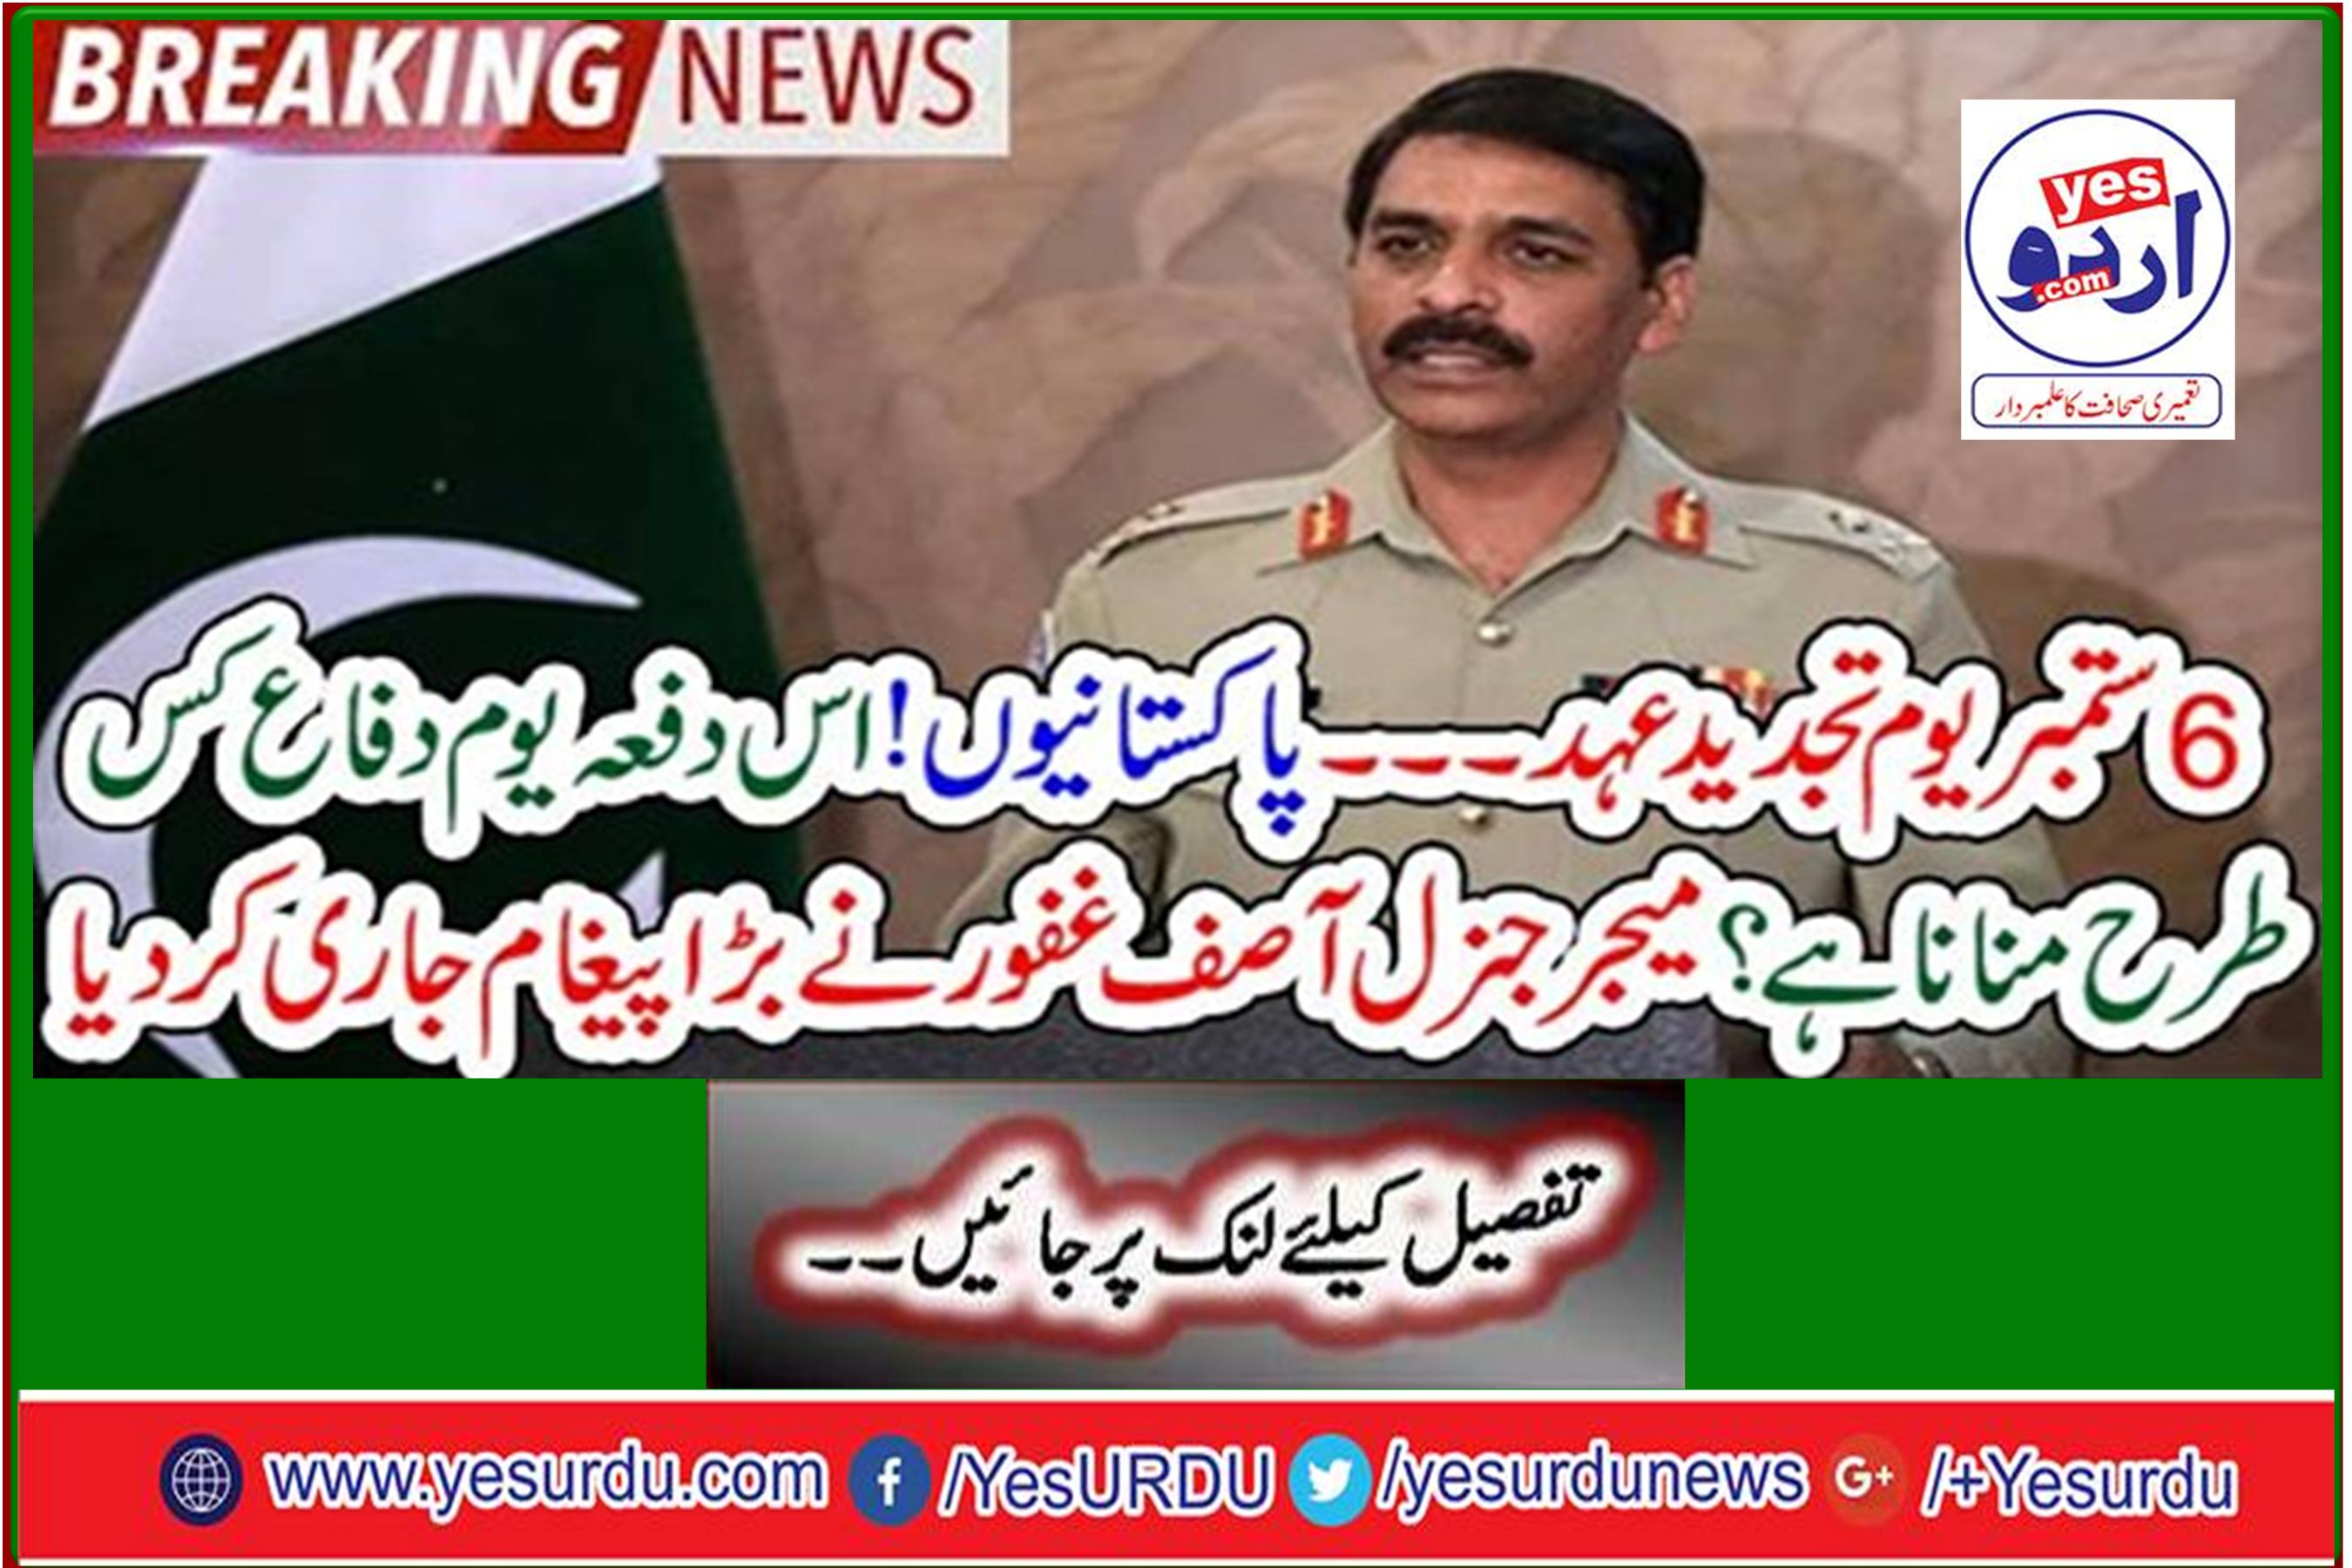 September 6 renewal day - Pakistanis! How to celebrate Day Defense this time? Major General Asif Ghafoor issued a big message